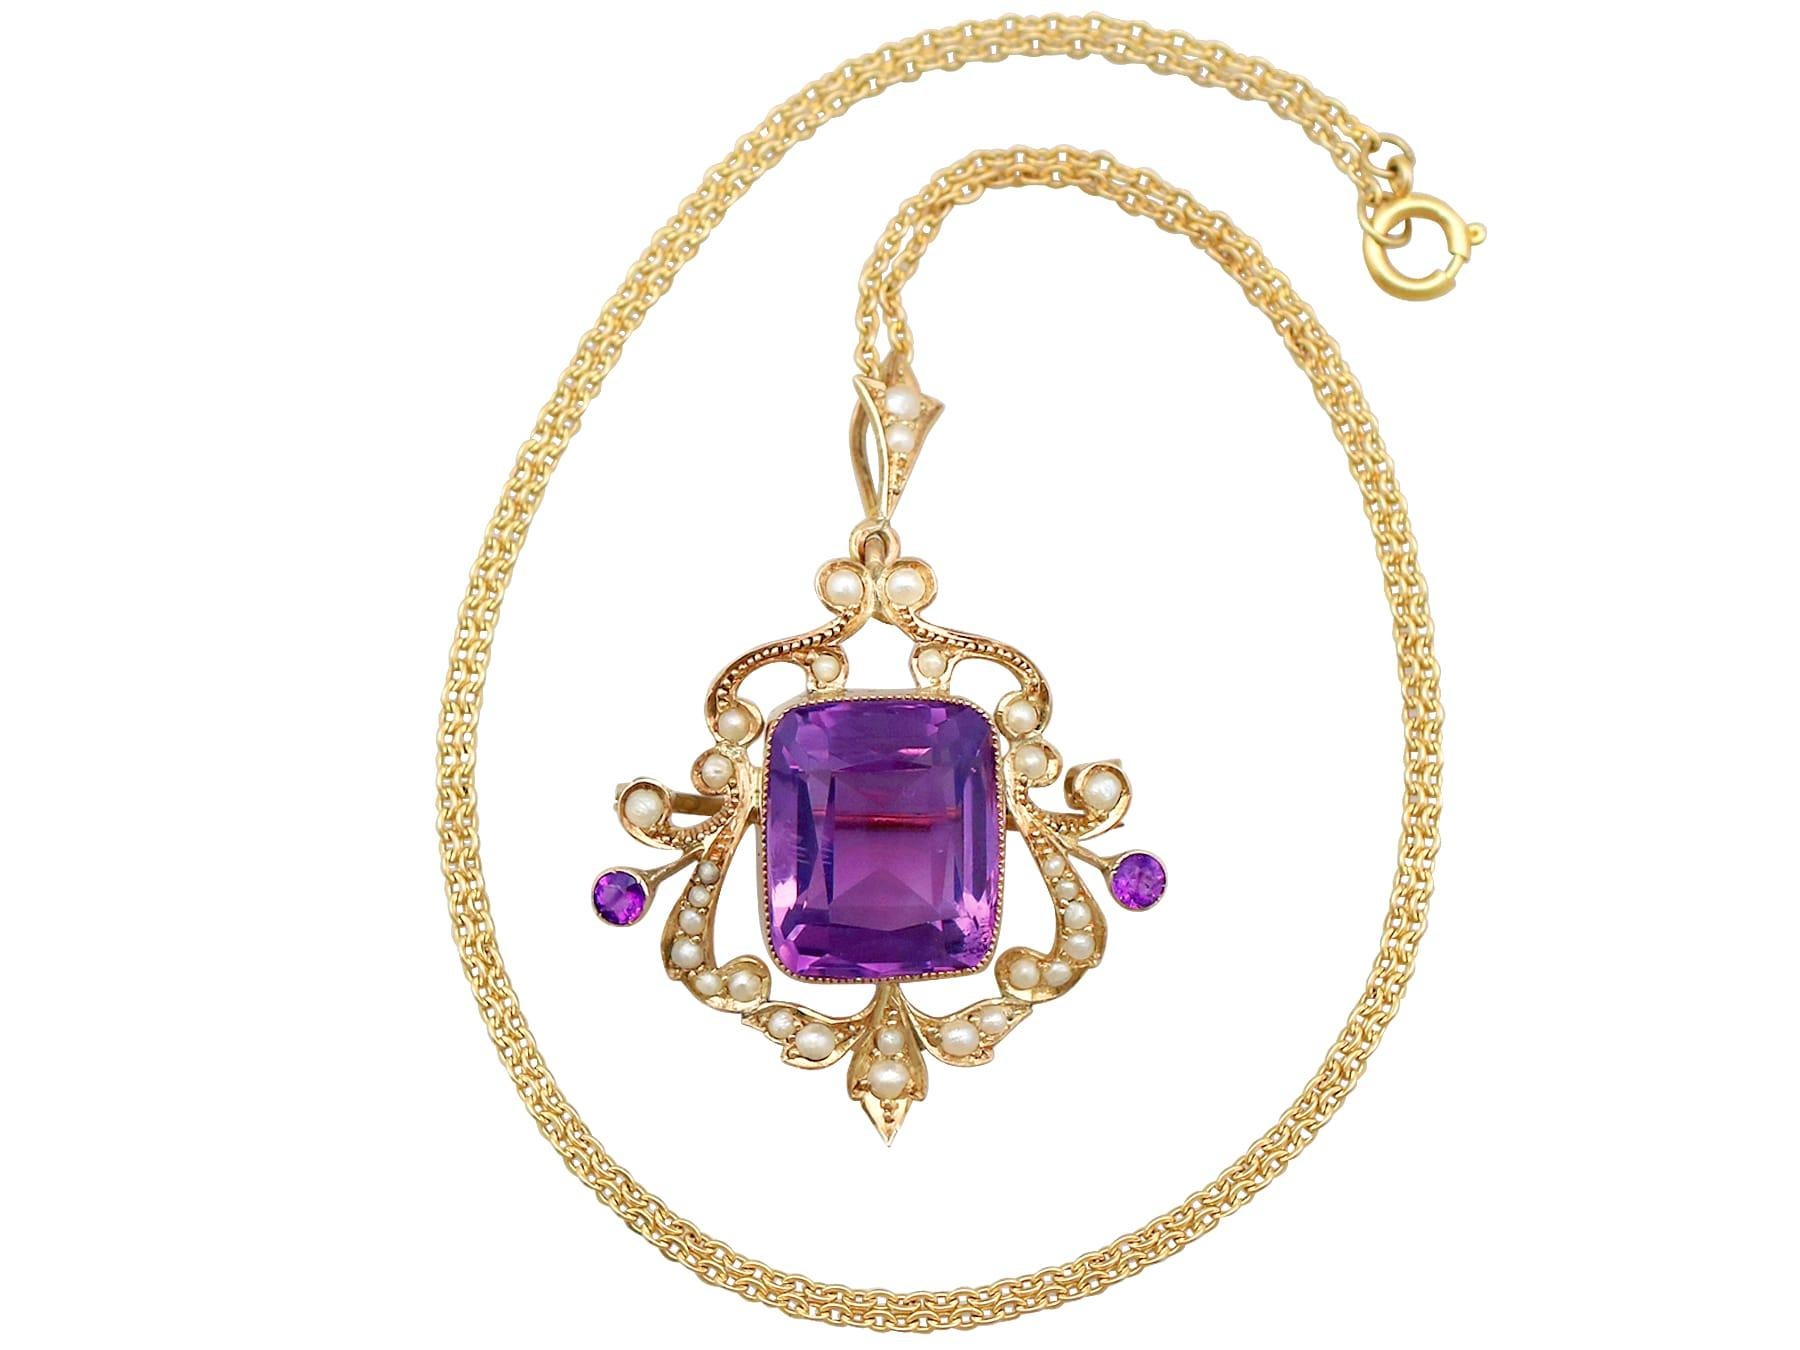 A stunning, fine and impressive antique 11.09 carat amethyst (total) and seed pearl, 9 karat yellow gold pendant / brooch; part of our antique jewelry and estate jewelry collections.

This stunning, fine and impressive antique pendant has been